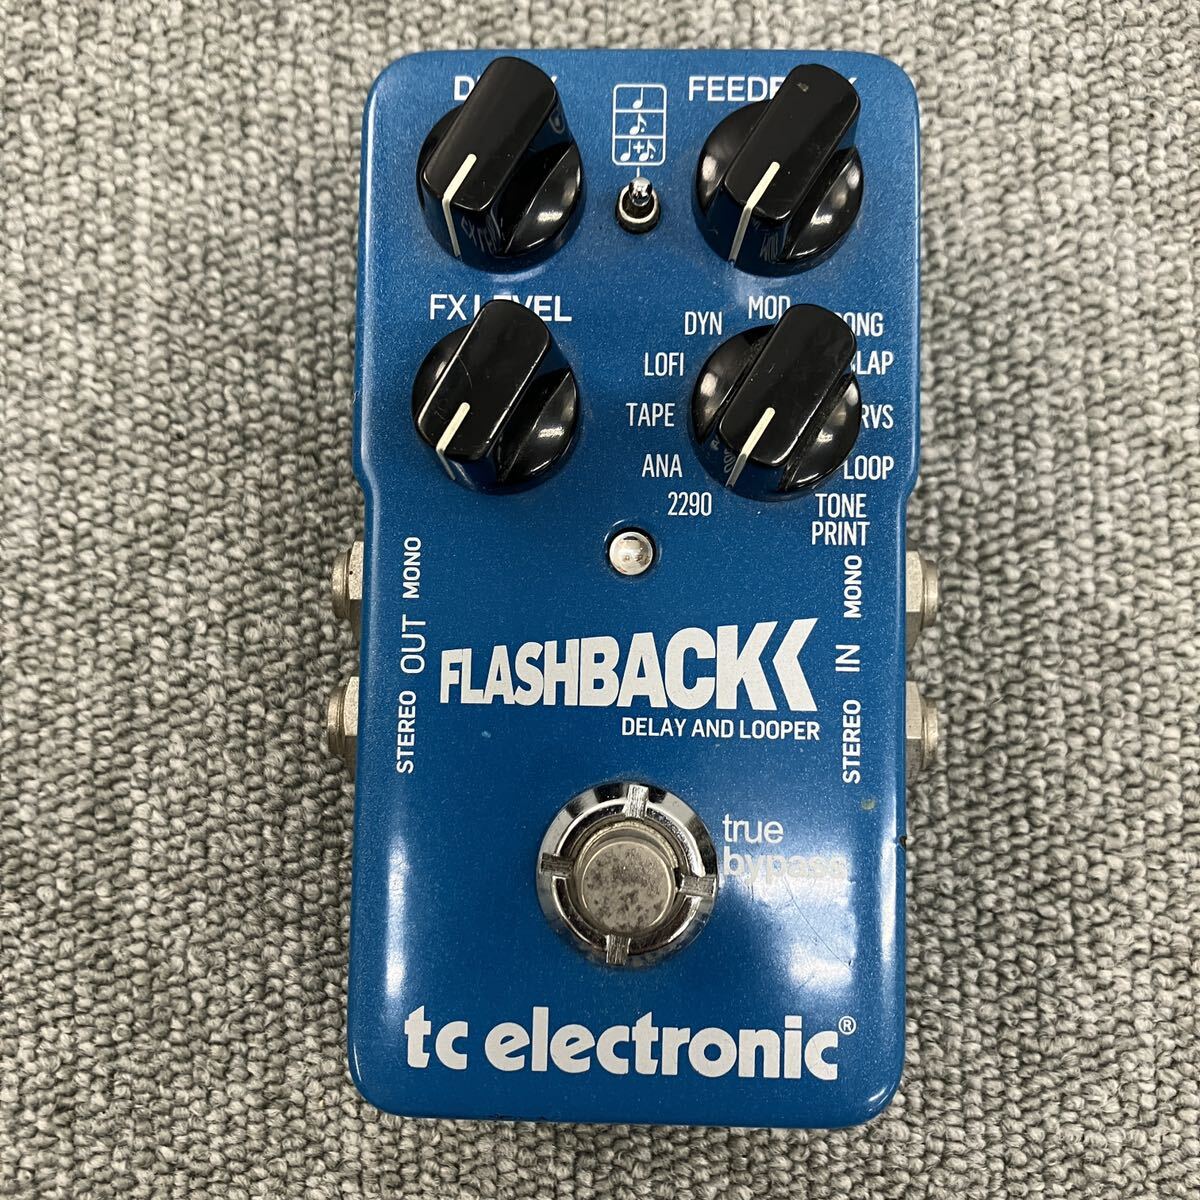 $[ selling out ]tc electronic FLASHBACK mini effector DELAY&LOOPER Delay & LOOPER space series effector guitar machinery sound out has confirmed 